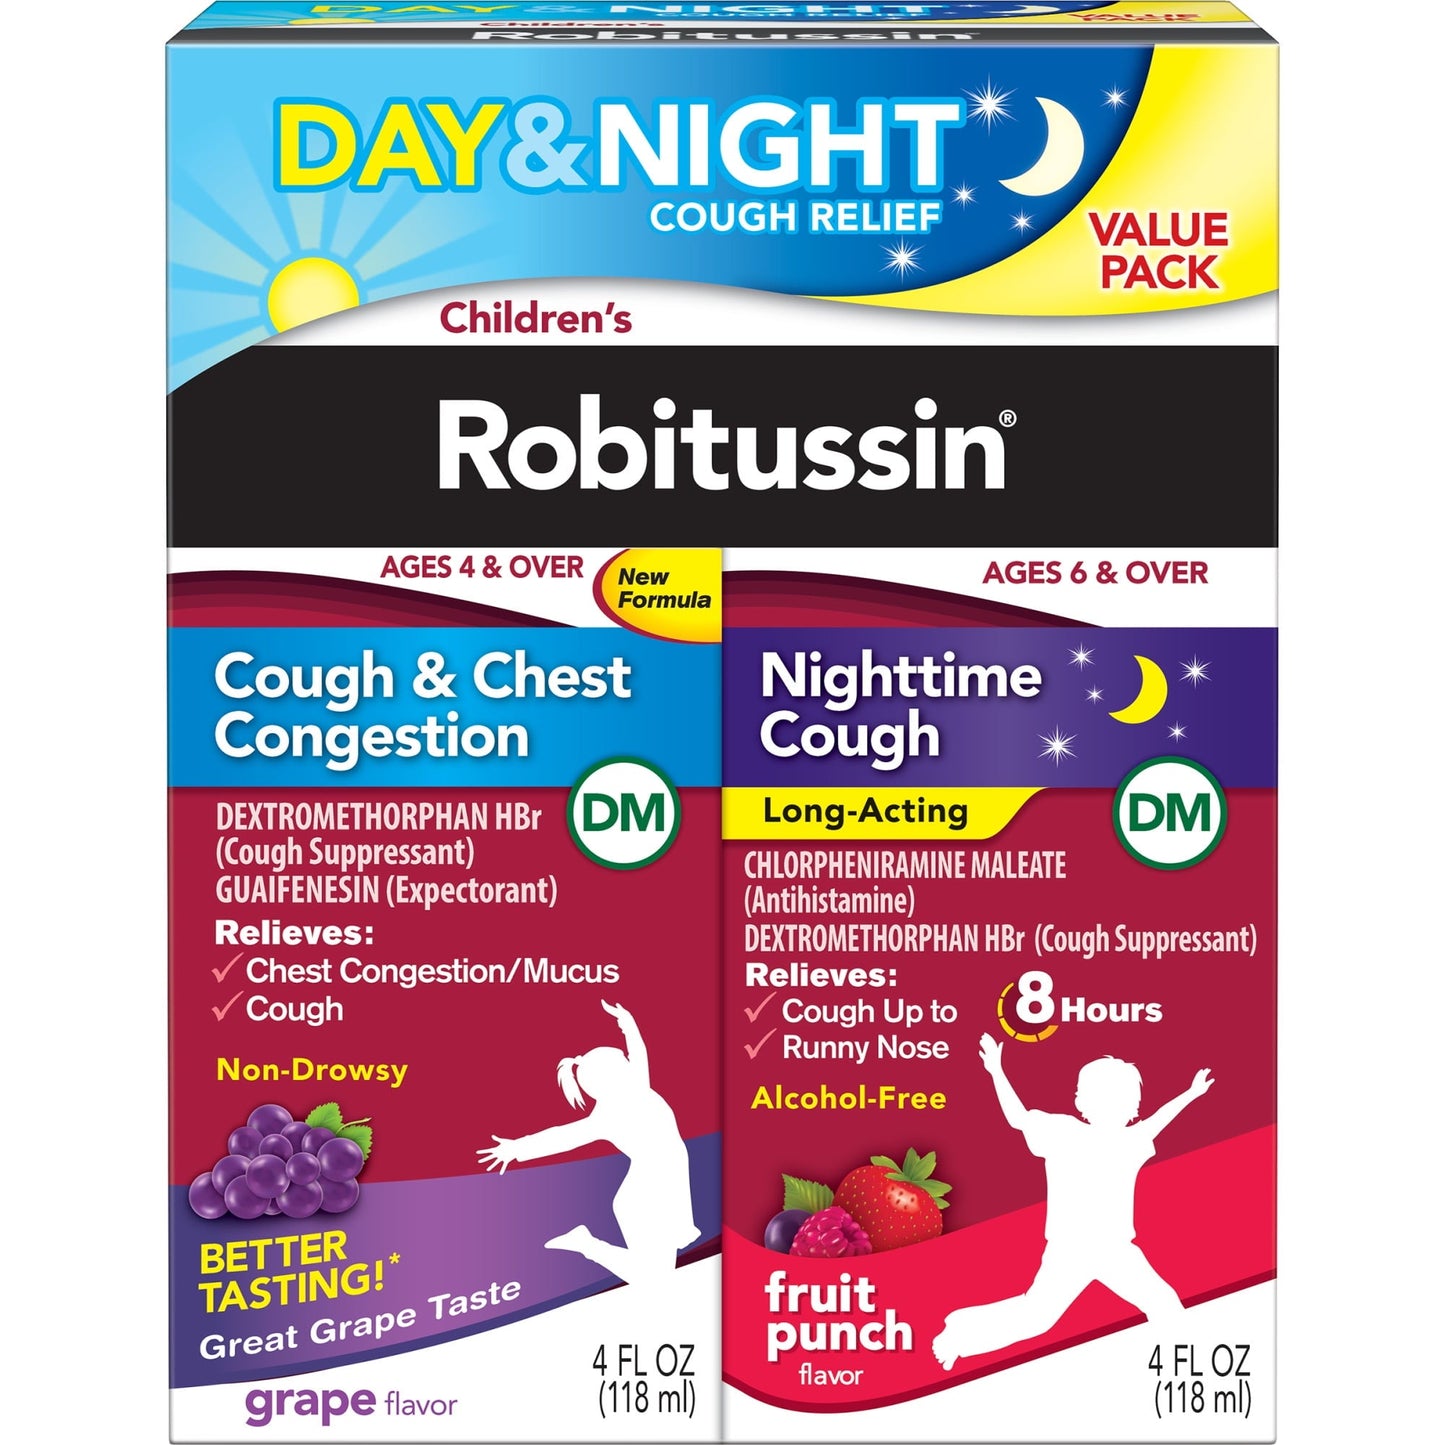 Children's Robitussin Kids Cough and Cold Medicine for Day and Night Relief, 4 Fl Oz, 2 Pack